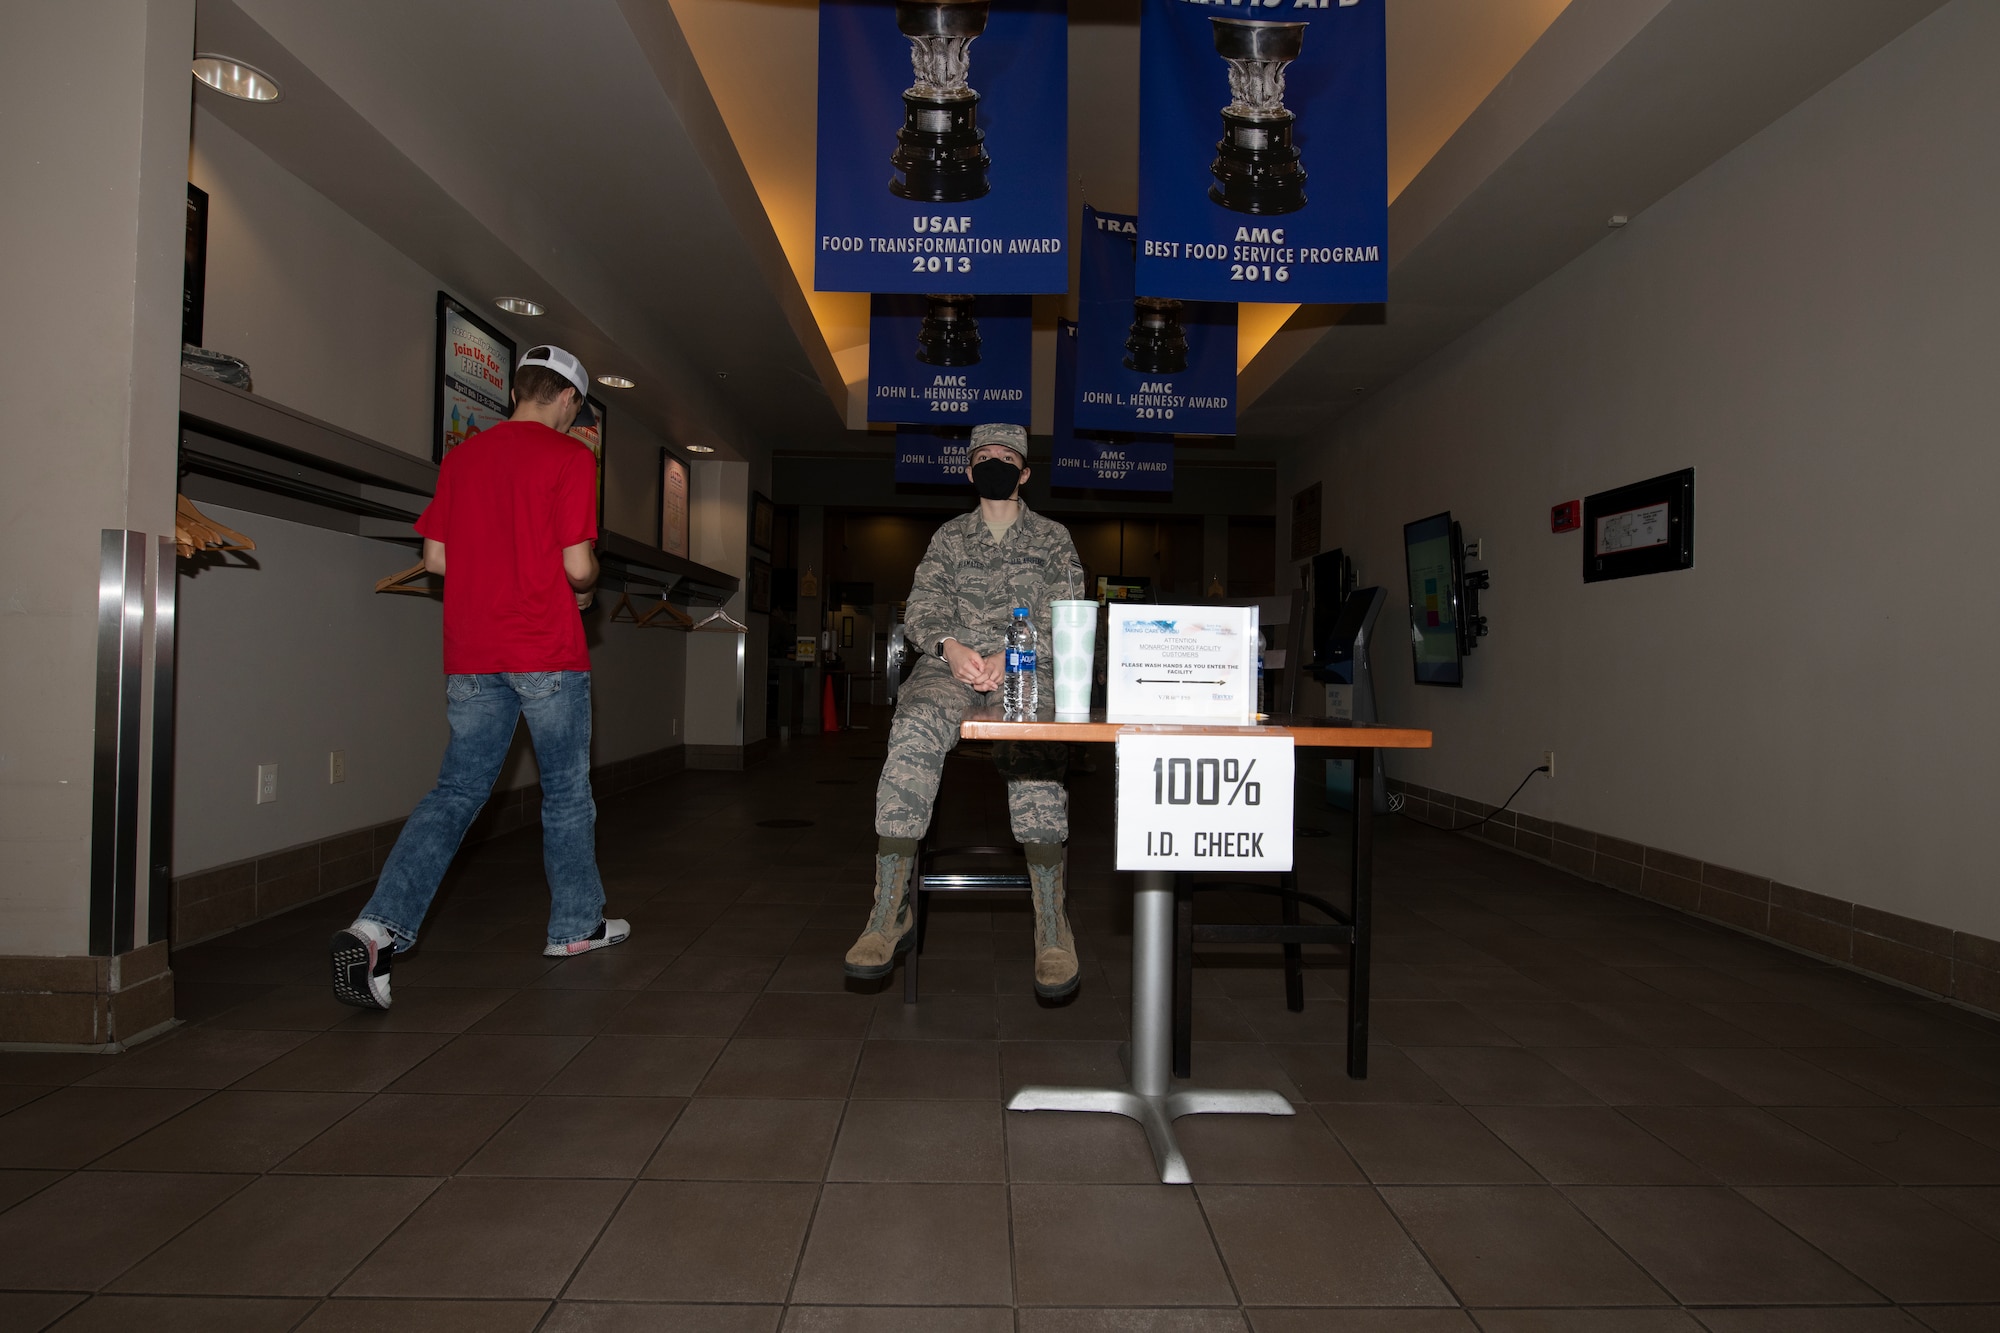 U.S. Air Force Airman 1st Class Layla Delamater, 60th Force Support Squadron food services apprentice, monitors entry into the Monarch Dining Facility April 24, 2020, at Travis Air Force Base, California. The facility is now only open to service members and requires patrons to wear masks and remain at least six feet apart while inside. (U.S. Air Force photo by Tech. Sgt. James Hodgman)